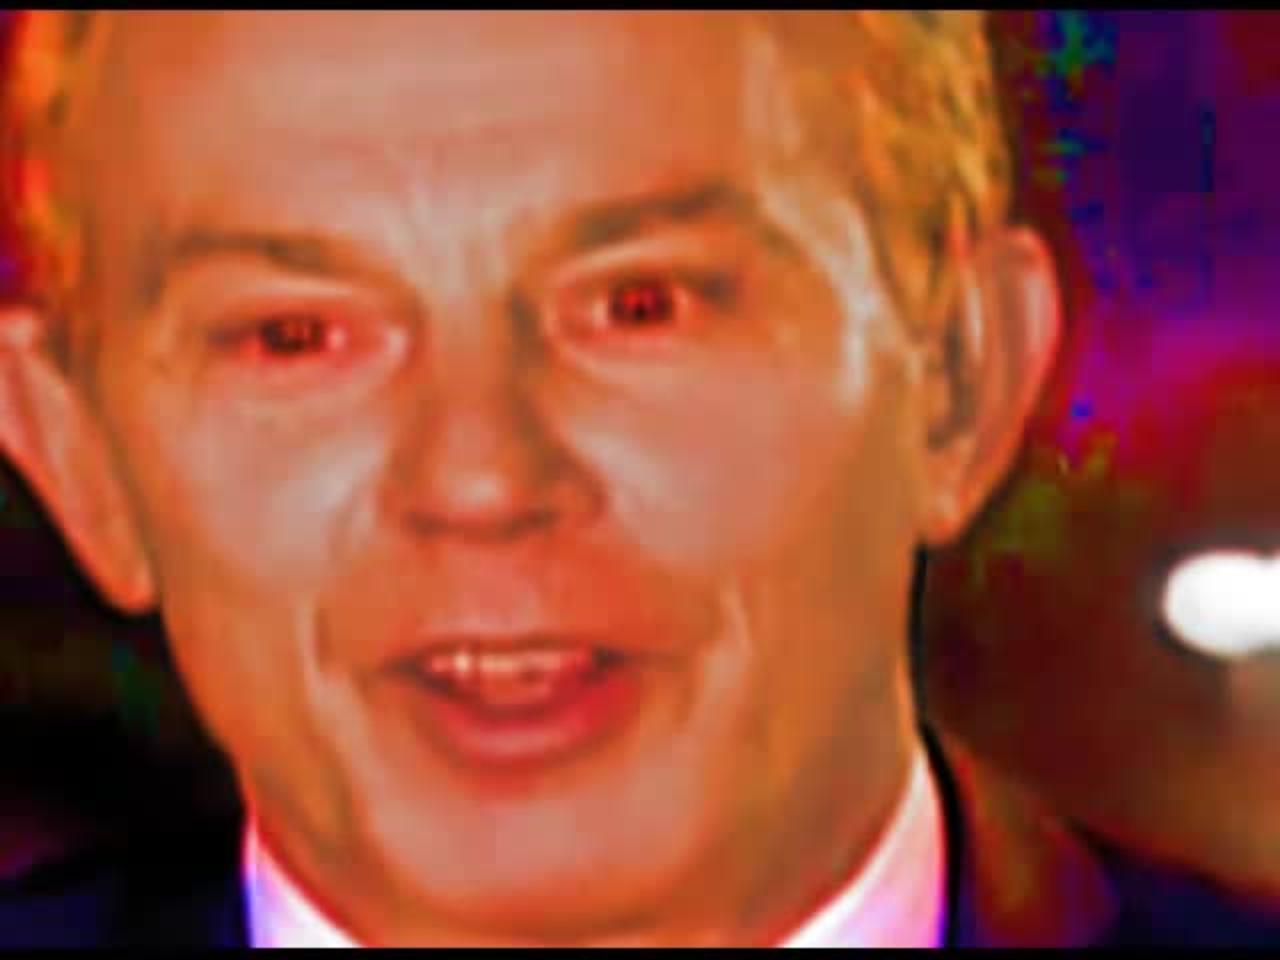 Reptilian Tony Blair, Former Uk Prime Minister - Frequency Fence